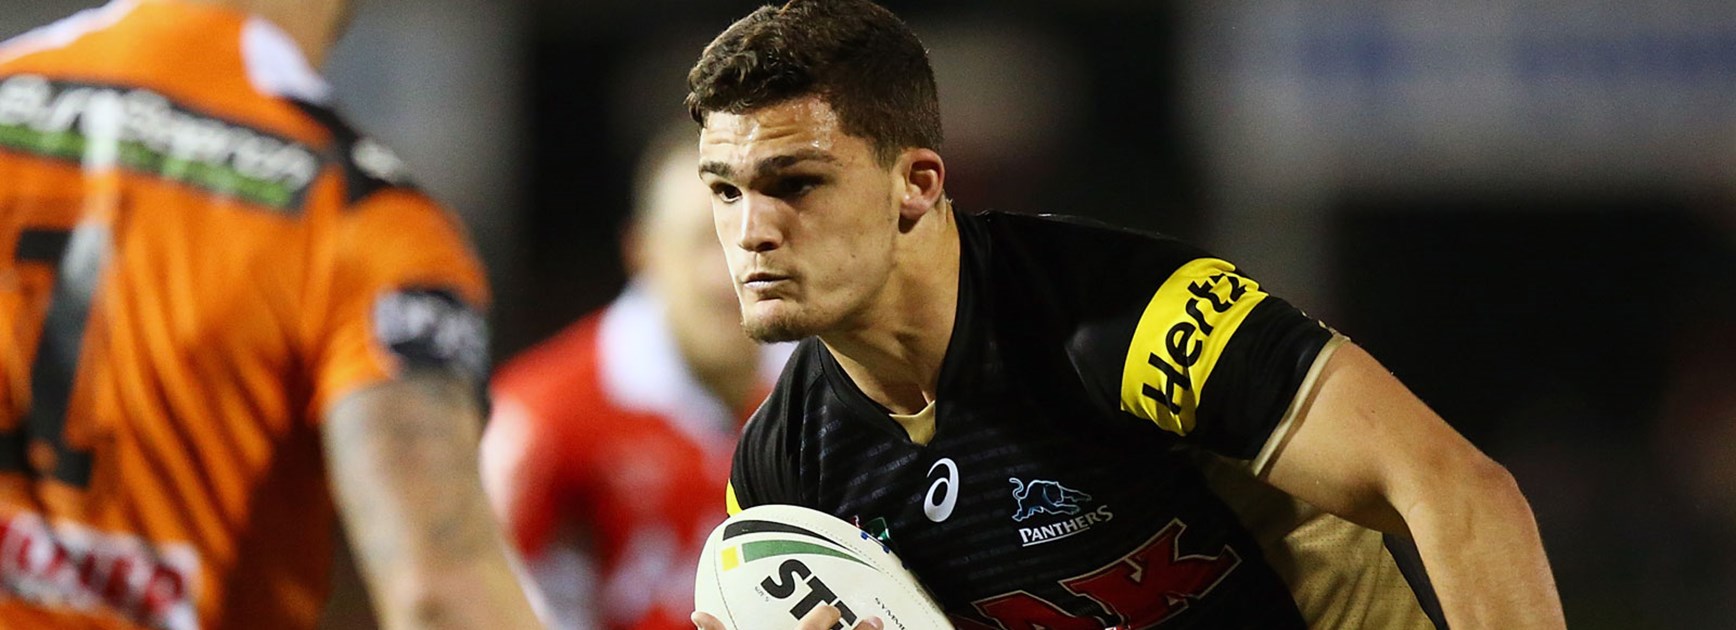 Panthers halfback Nathan Cleary against Wests Tigers in Round 24.